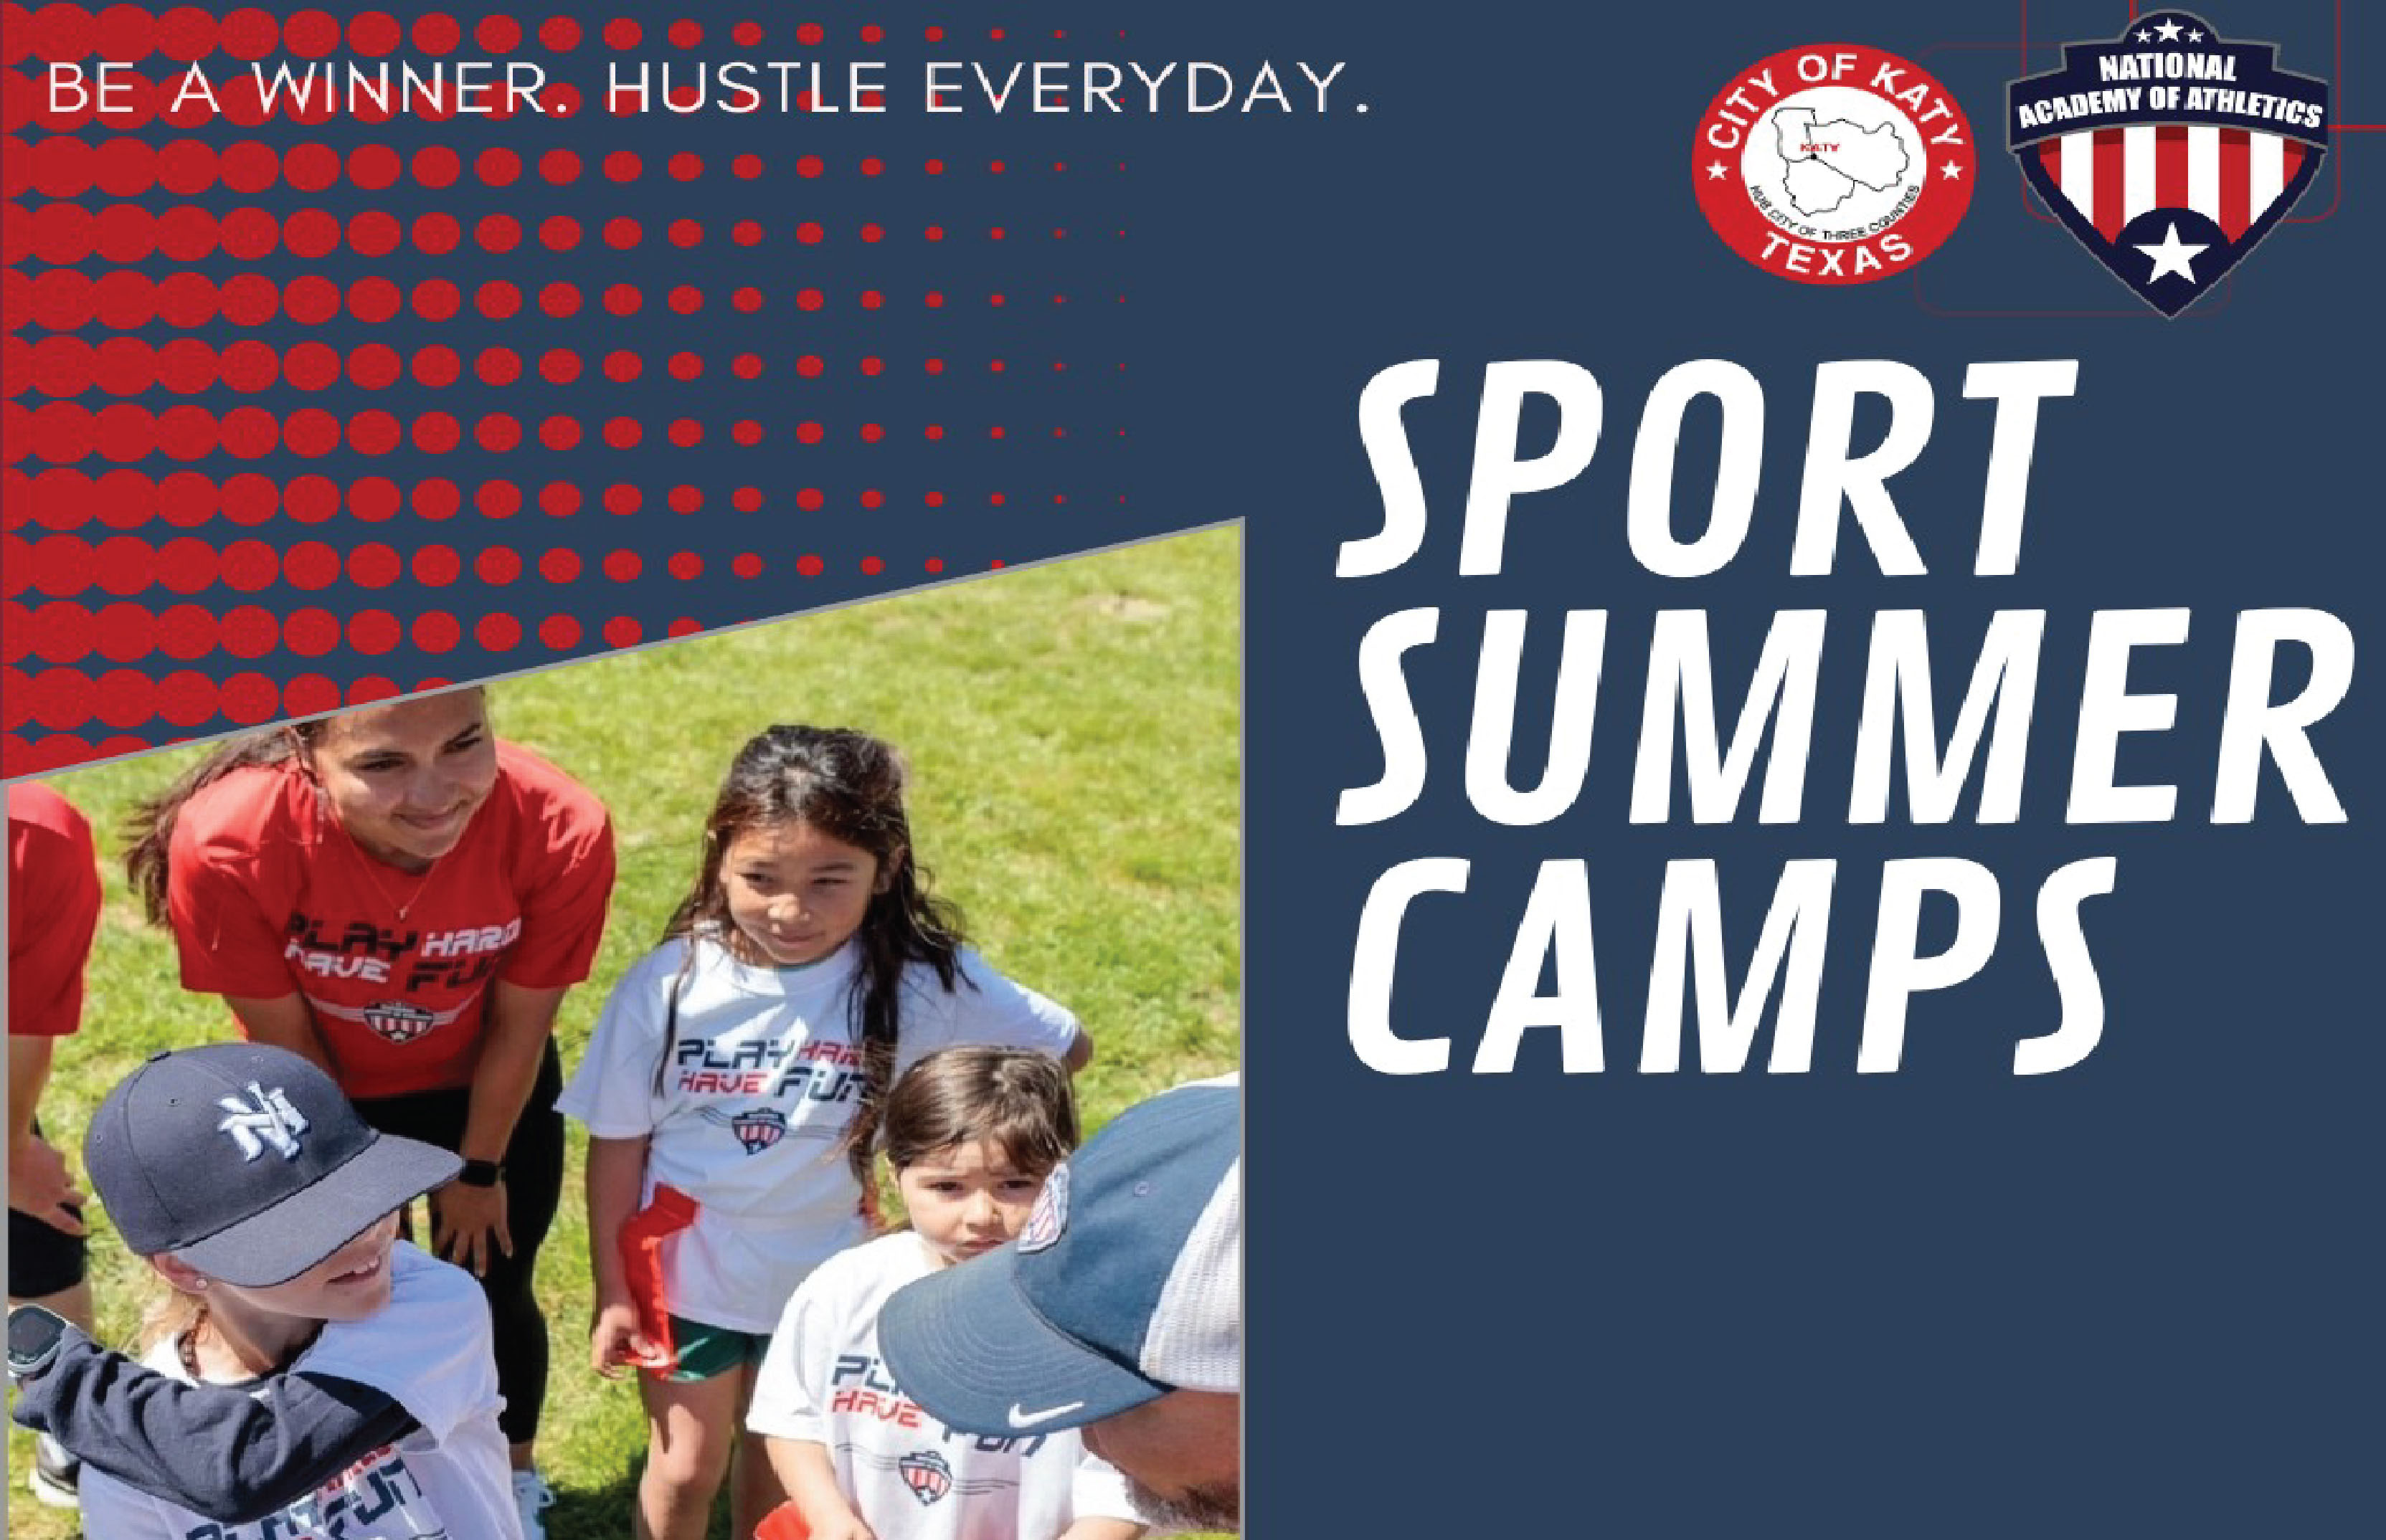 National Academy of Athletics Offering Summer Sports Camps at Katy City